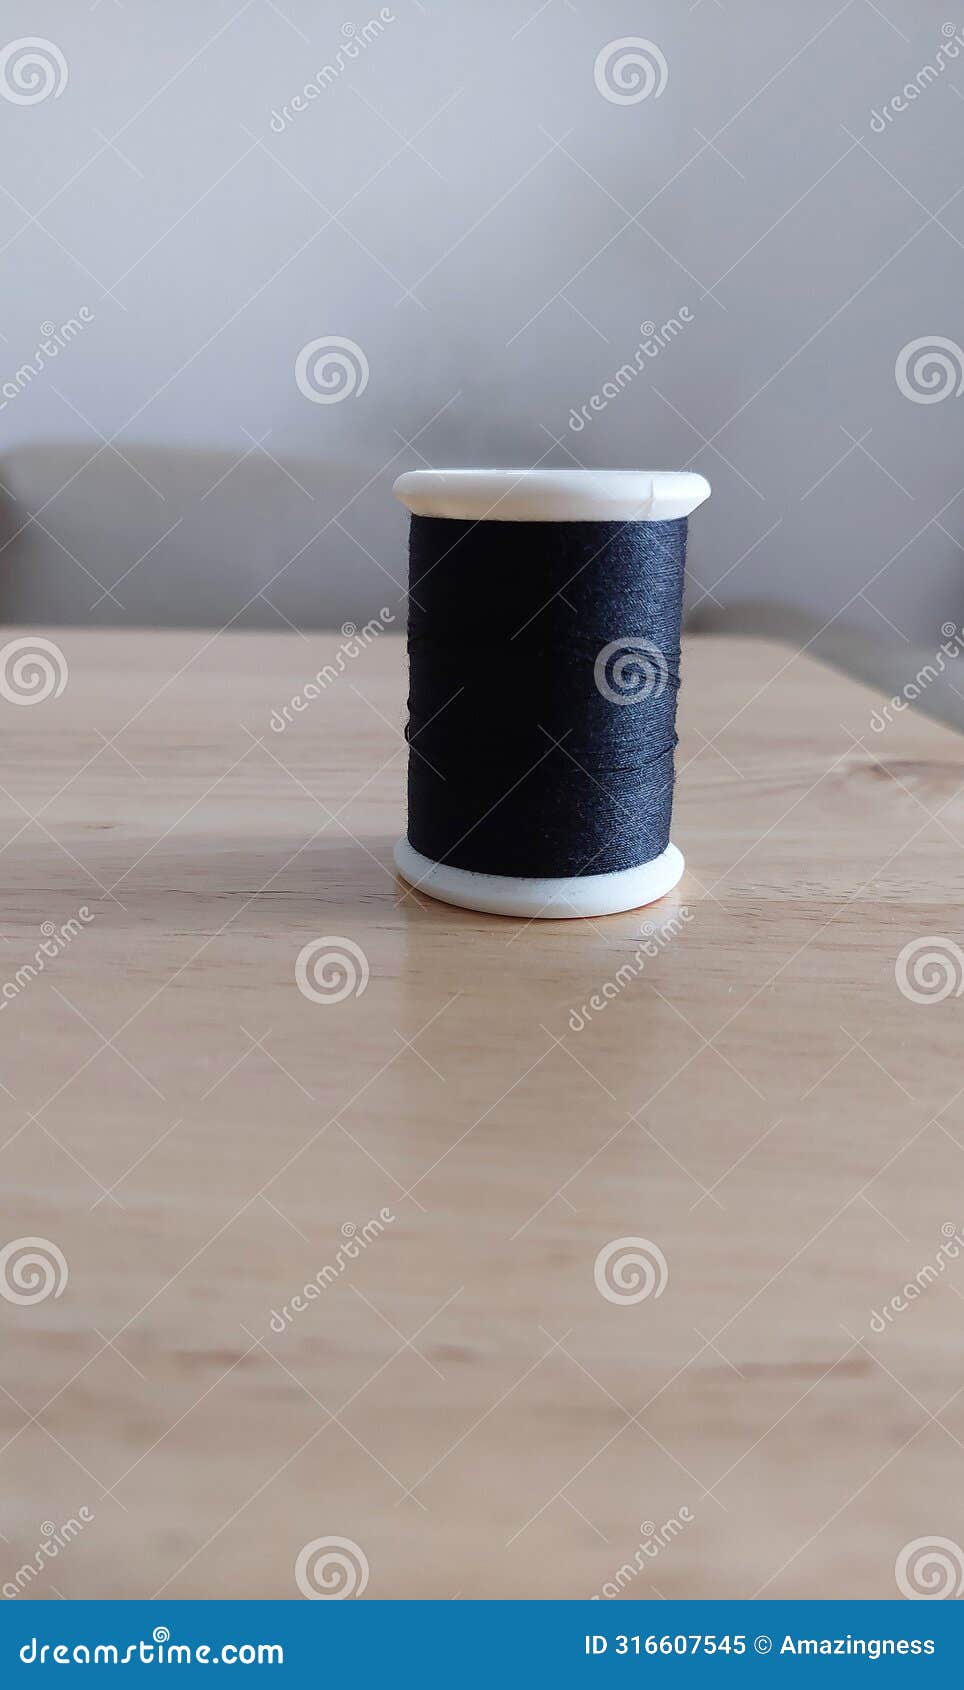 black spool of sewing thread on wooden table.